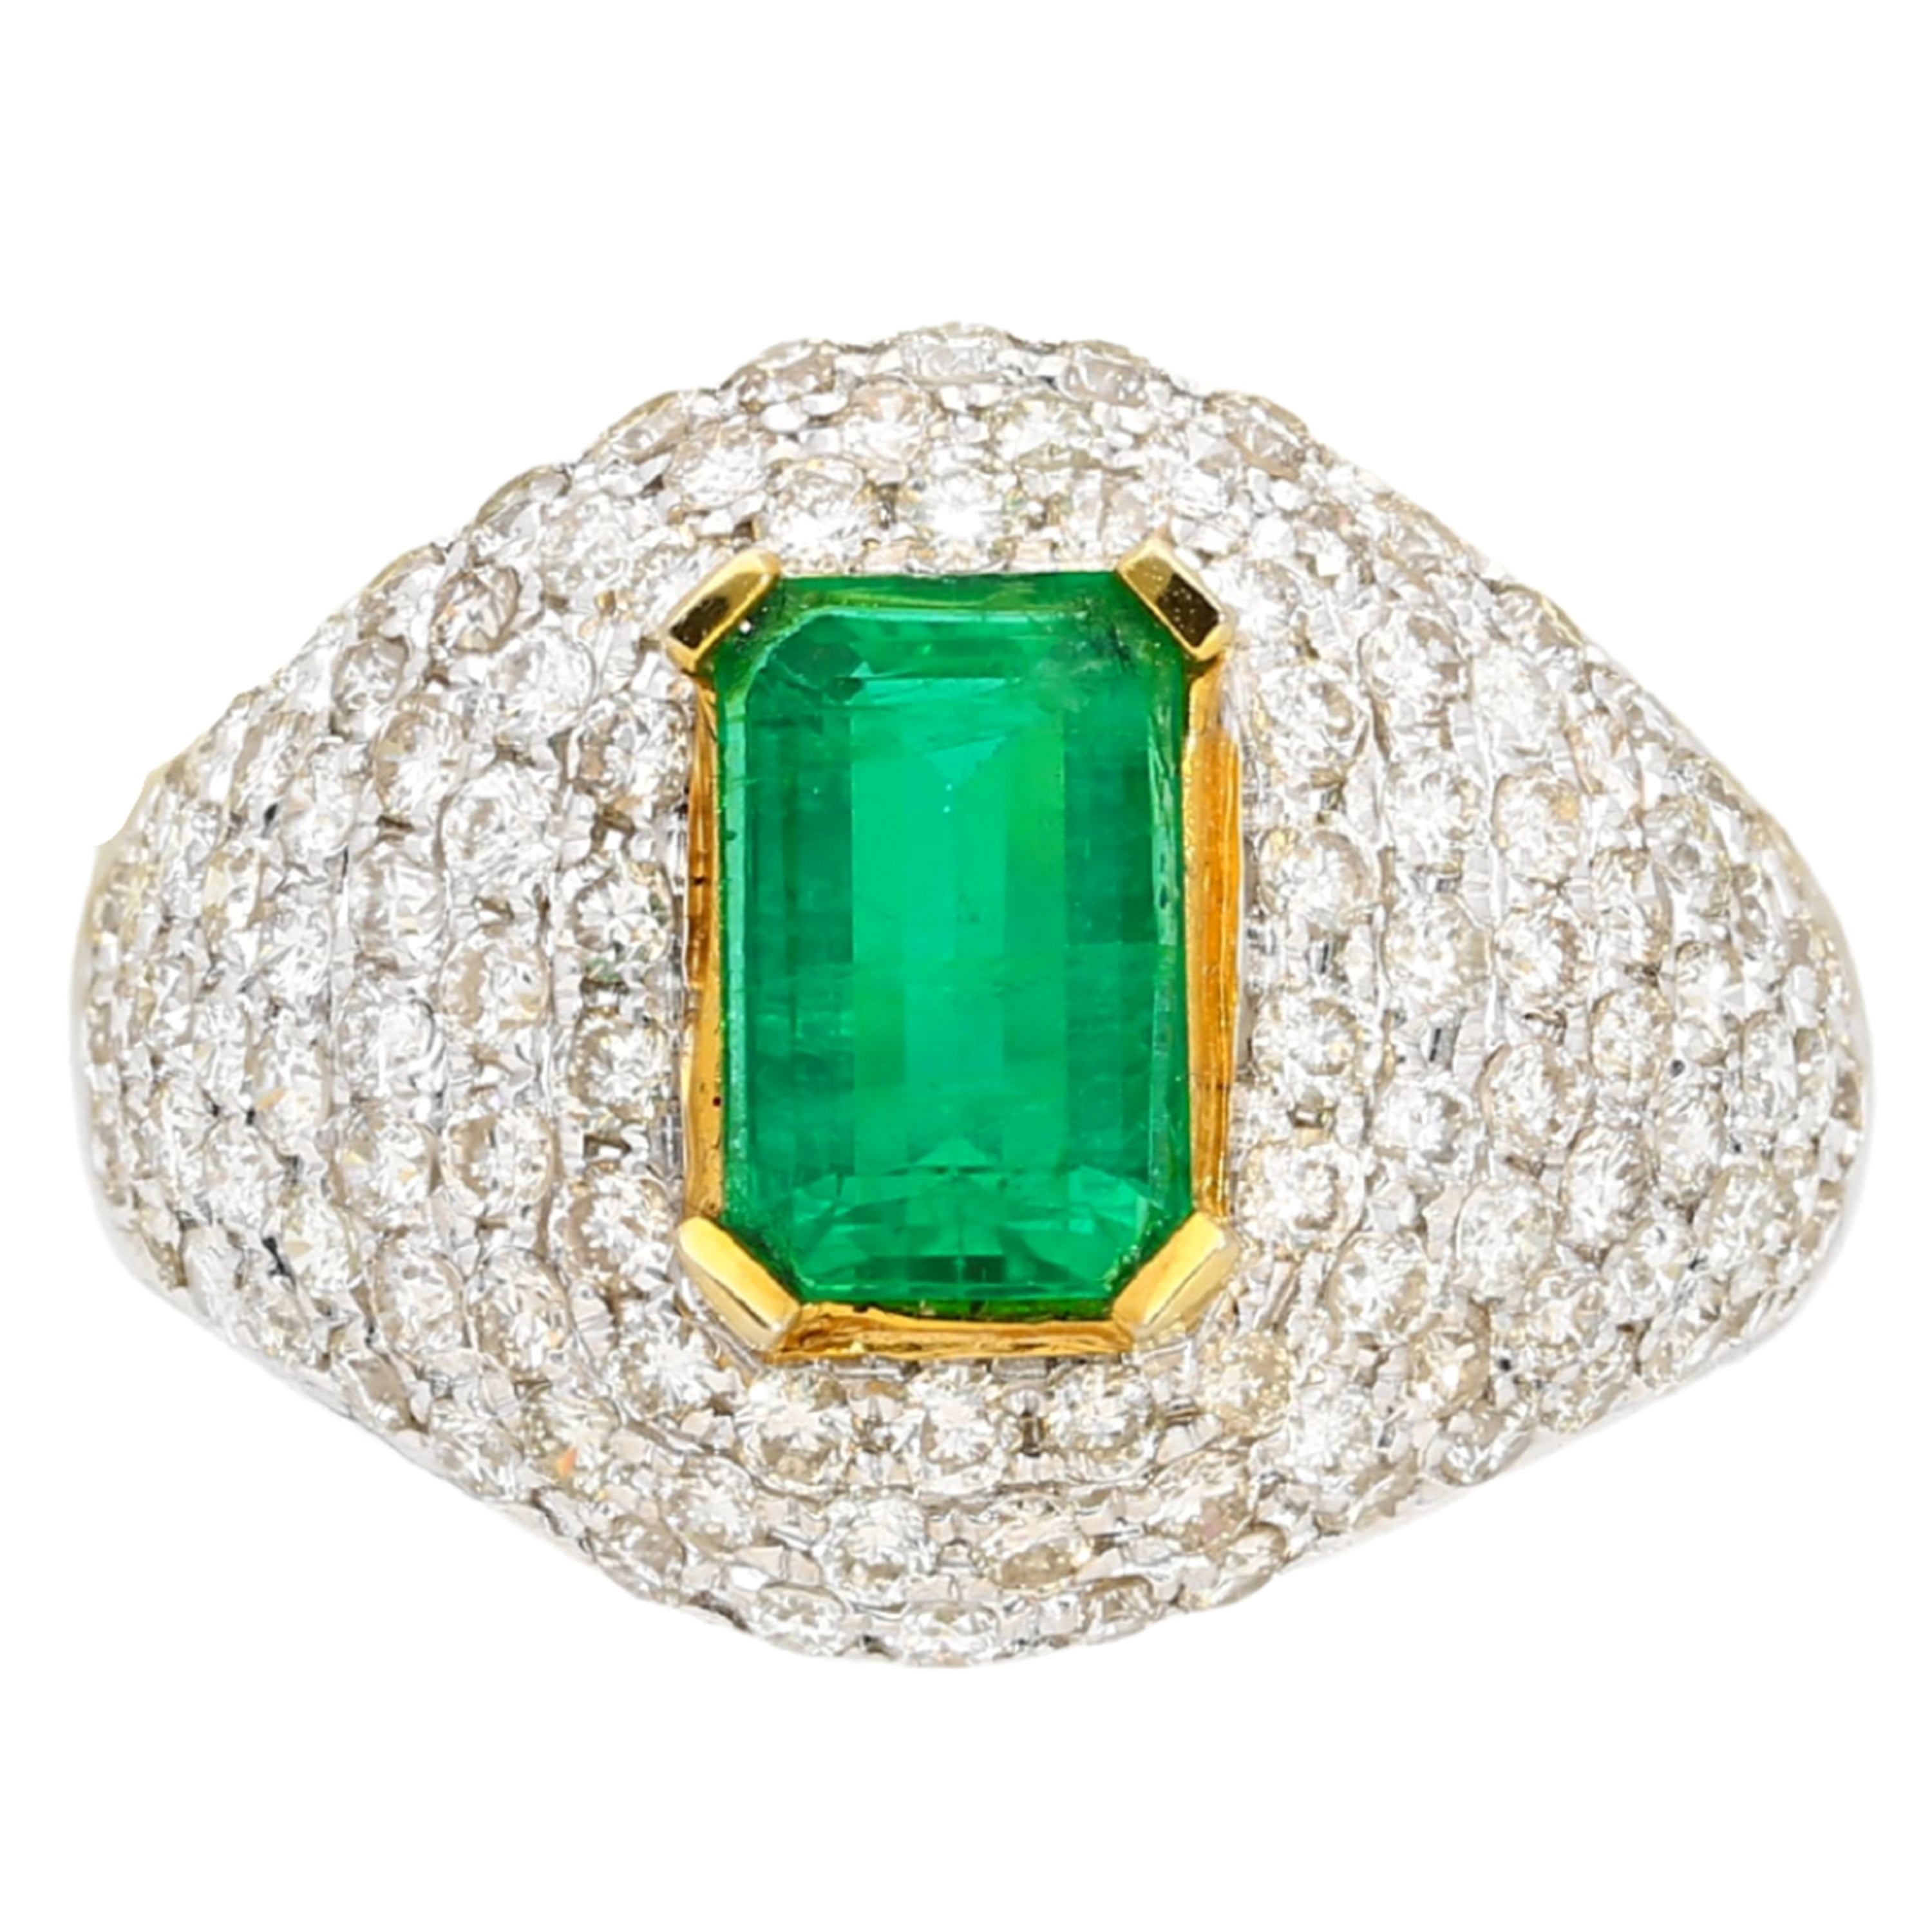 1.25 Carat Emerald Cut Emerald and White Diamond Cluster Ring in 18k White Gold